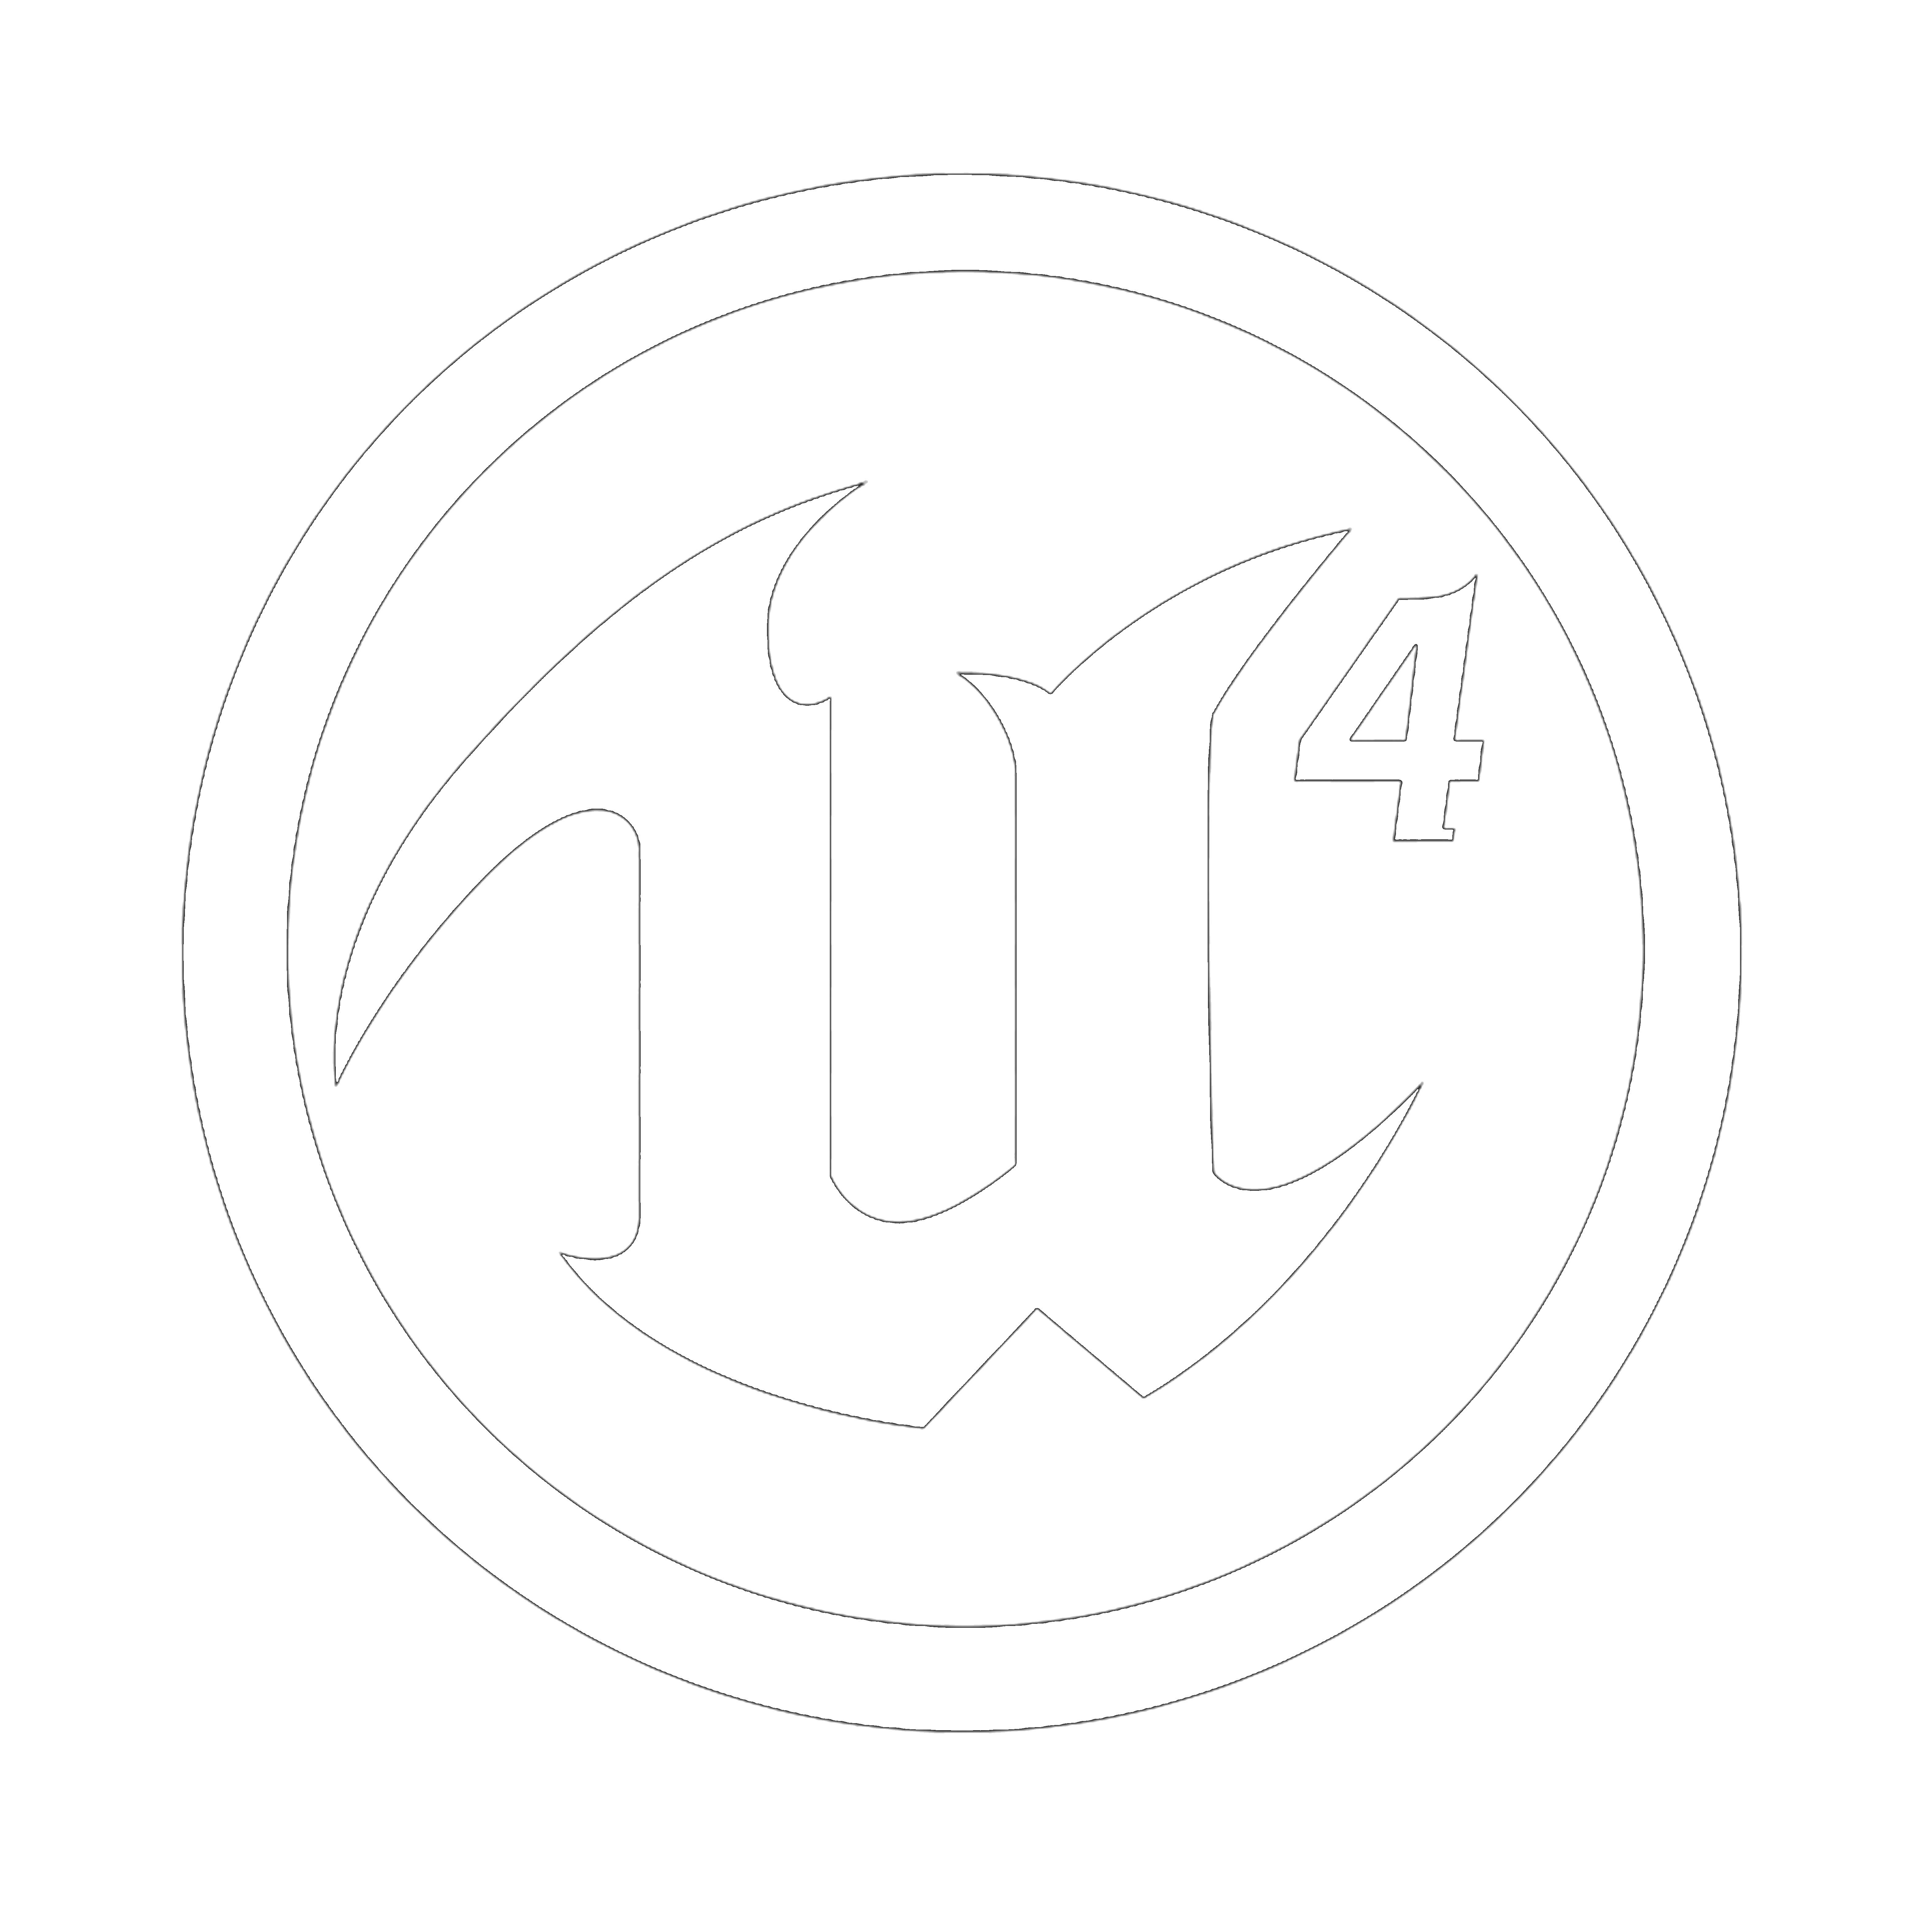 An icon representing Unreal Engine 4